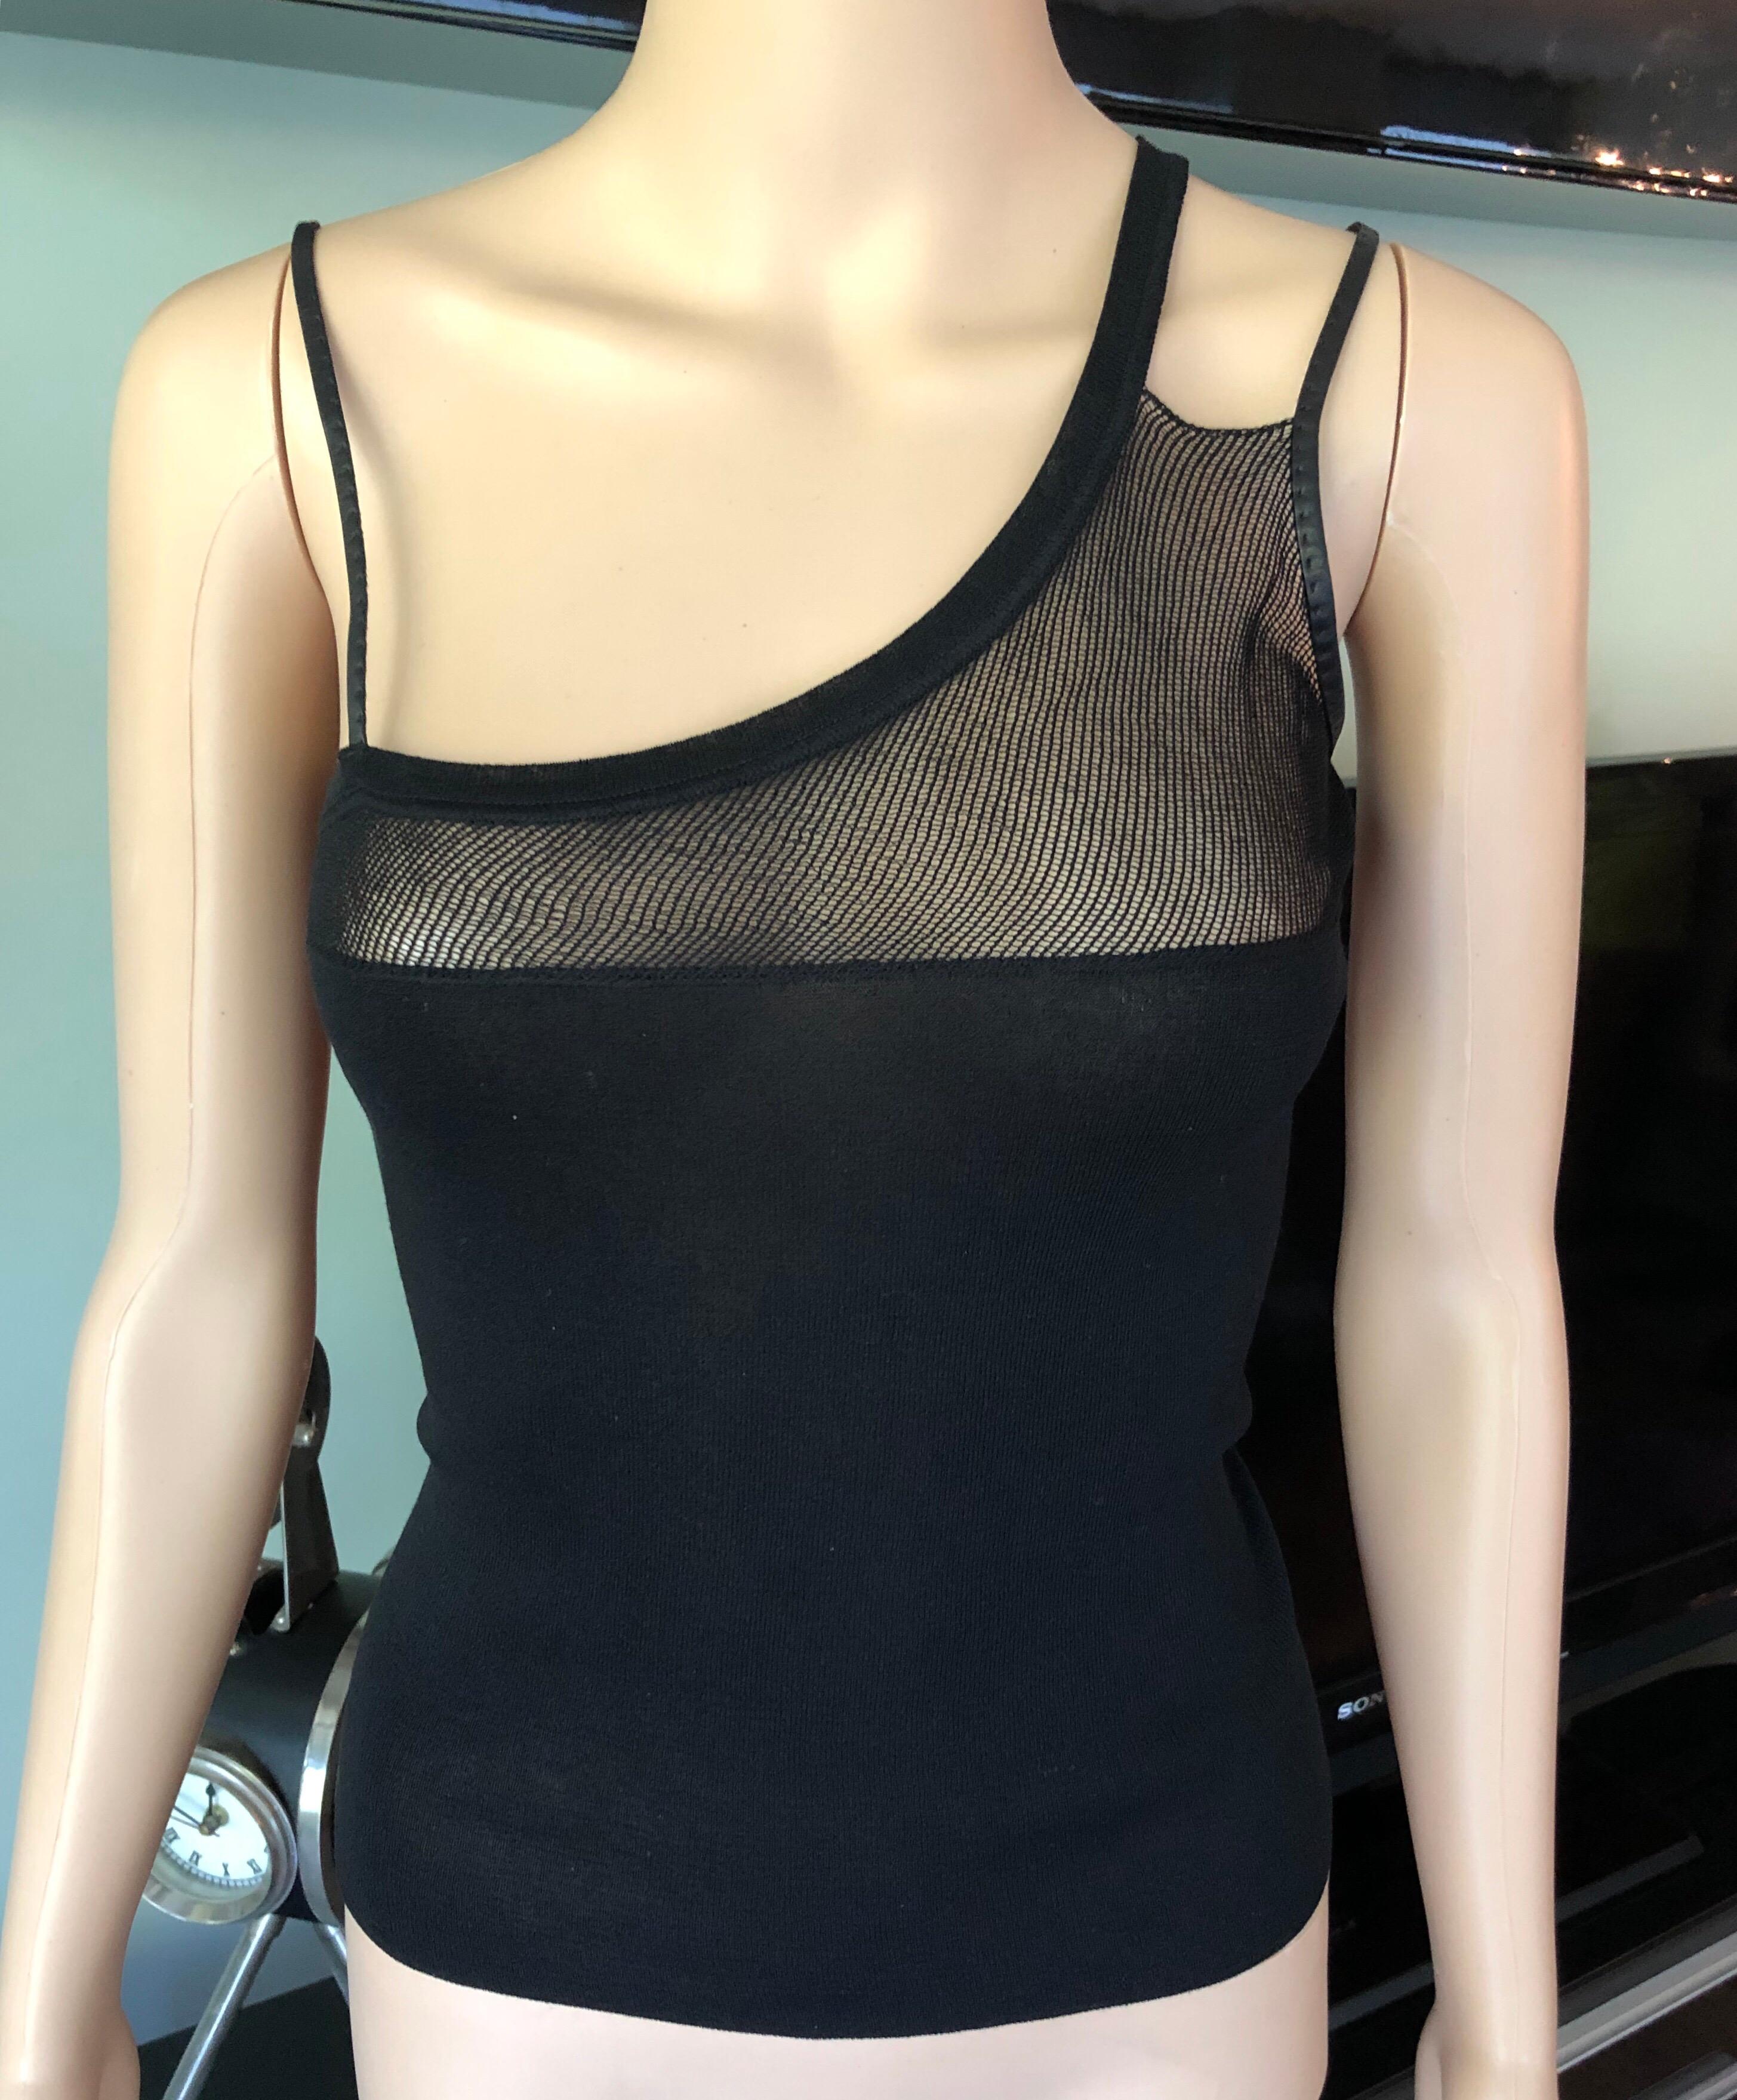 Gucci by Tom Ford Semi Sheer Knit Black Top Size S

Black Gucci sleeveless semi-sheer knit top with asymmetrical neckline featuring sheer mesh panel
